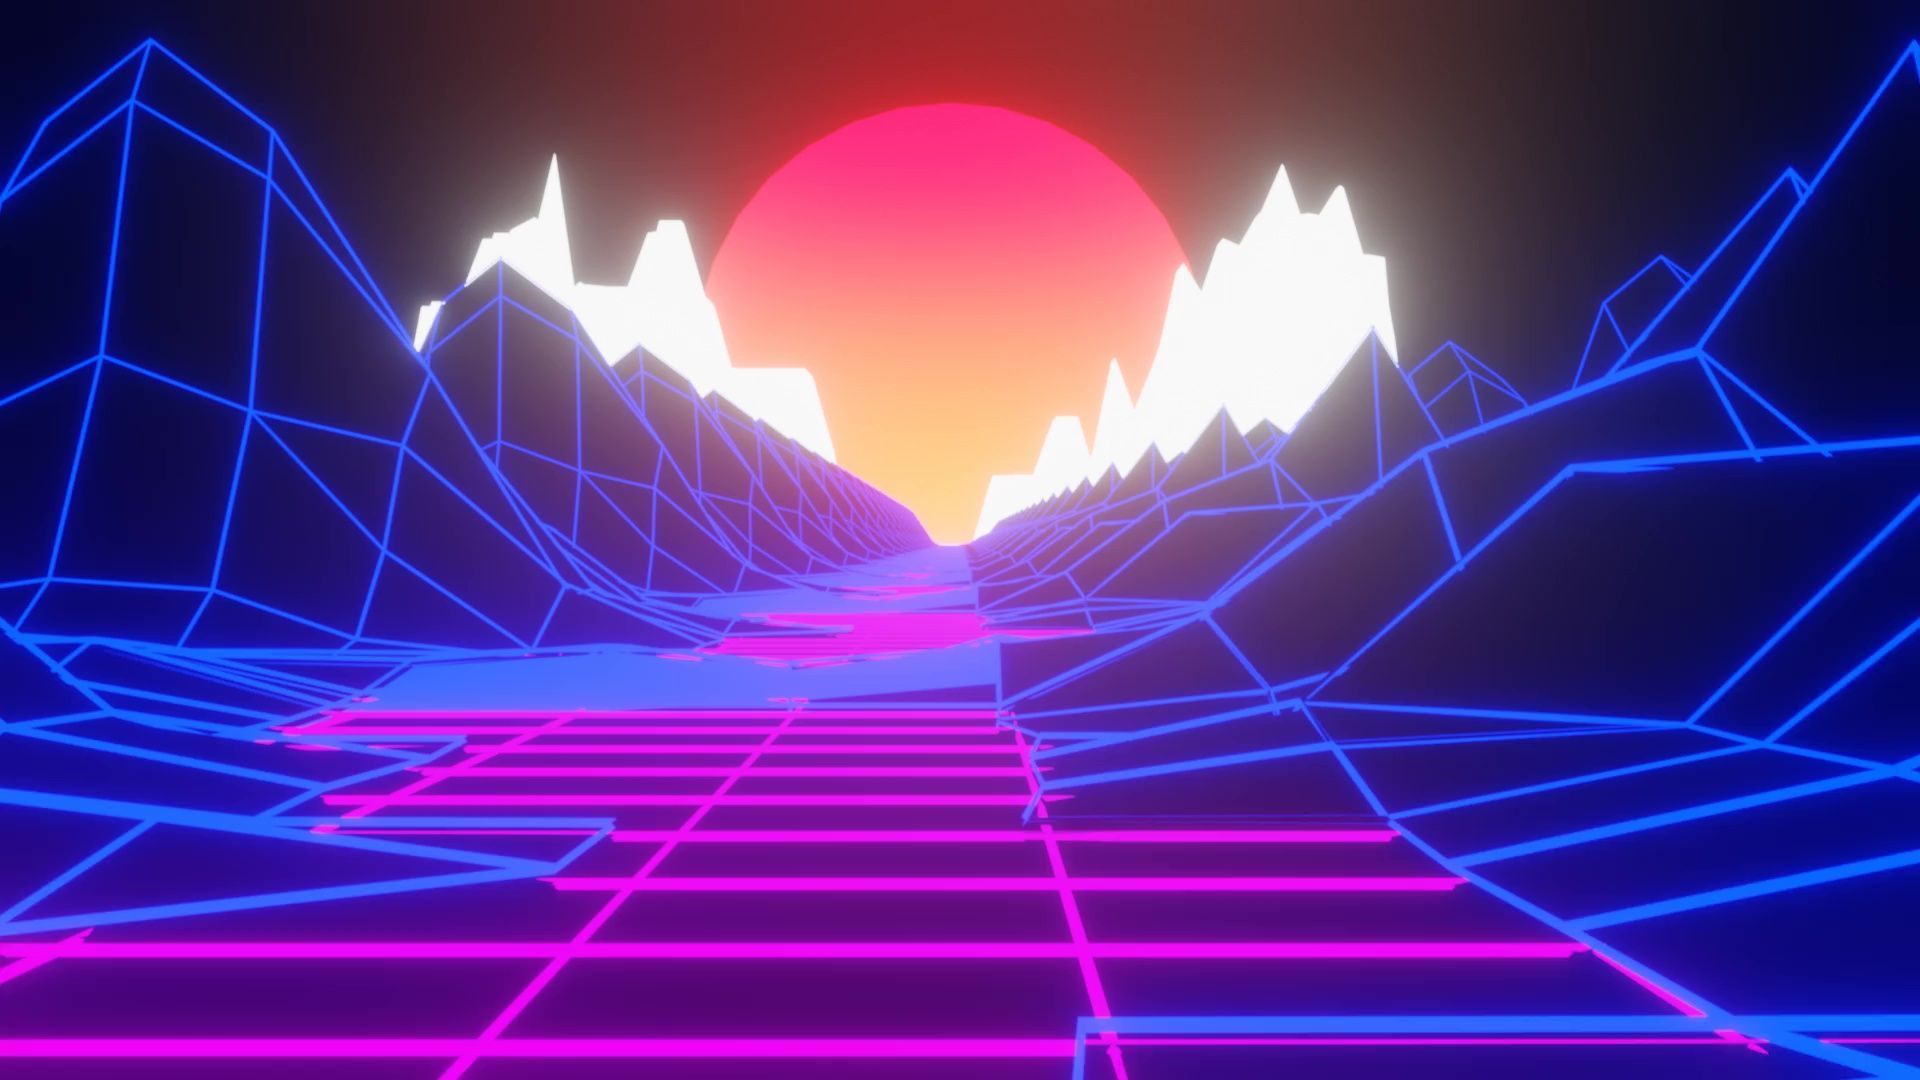 Synthwave aesthetic background with neon lines and mountains. 80s retro style. - Synthwave